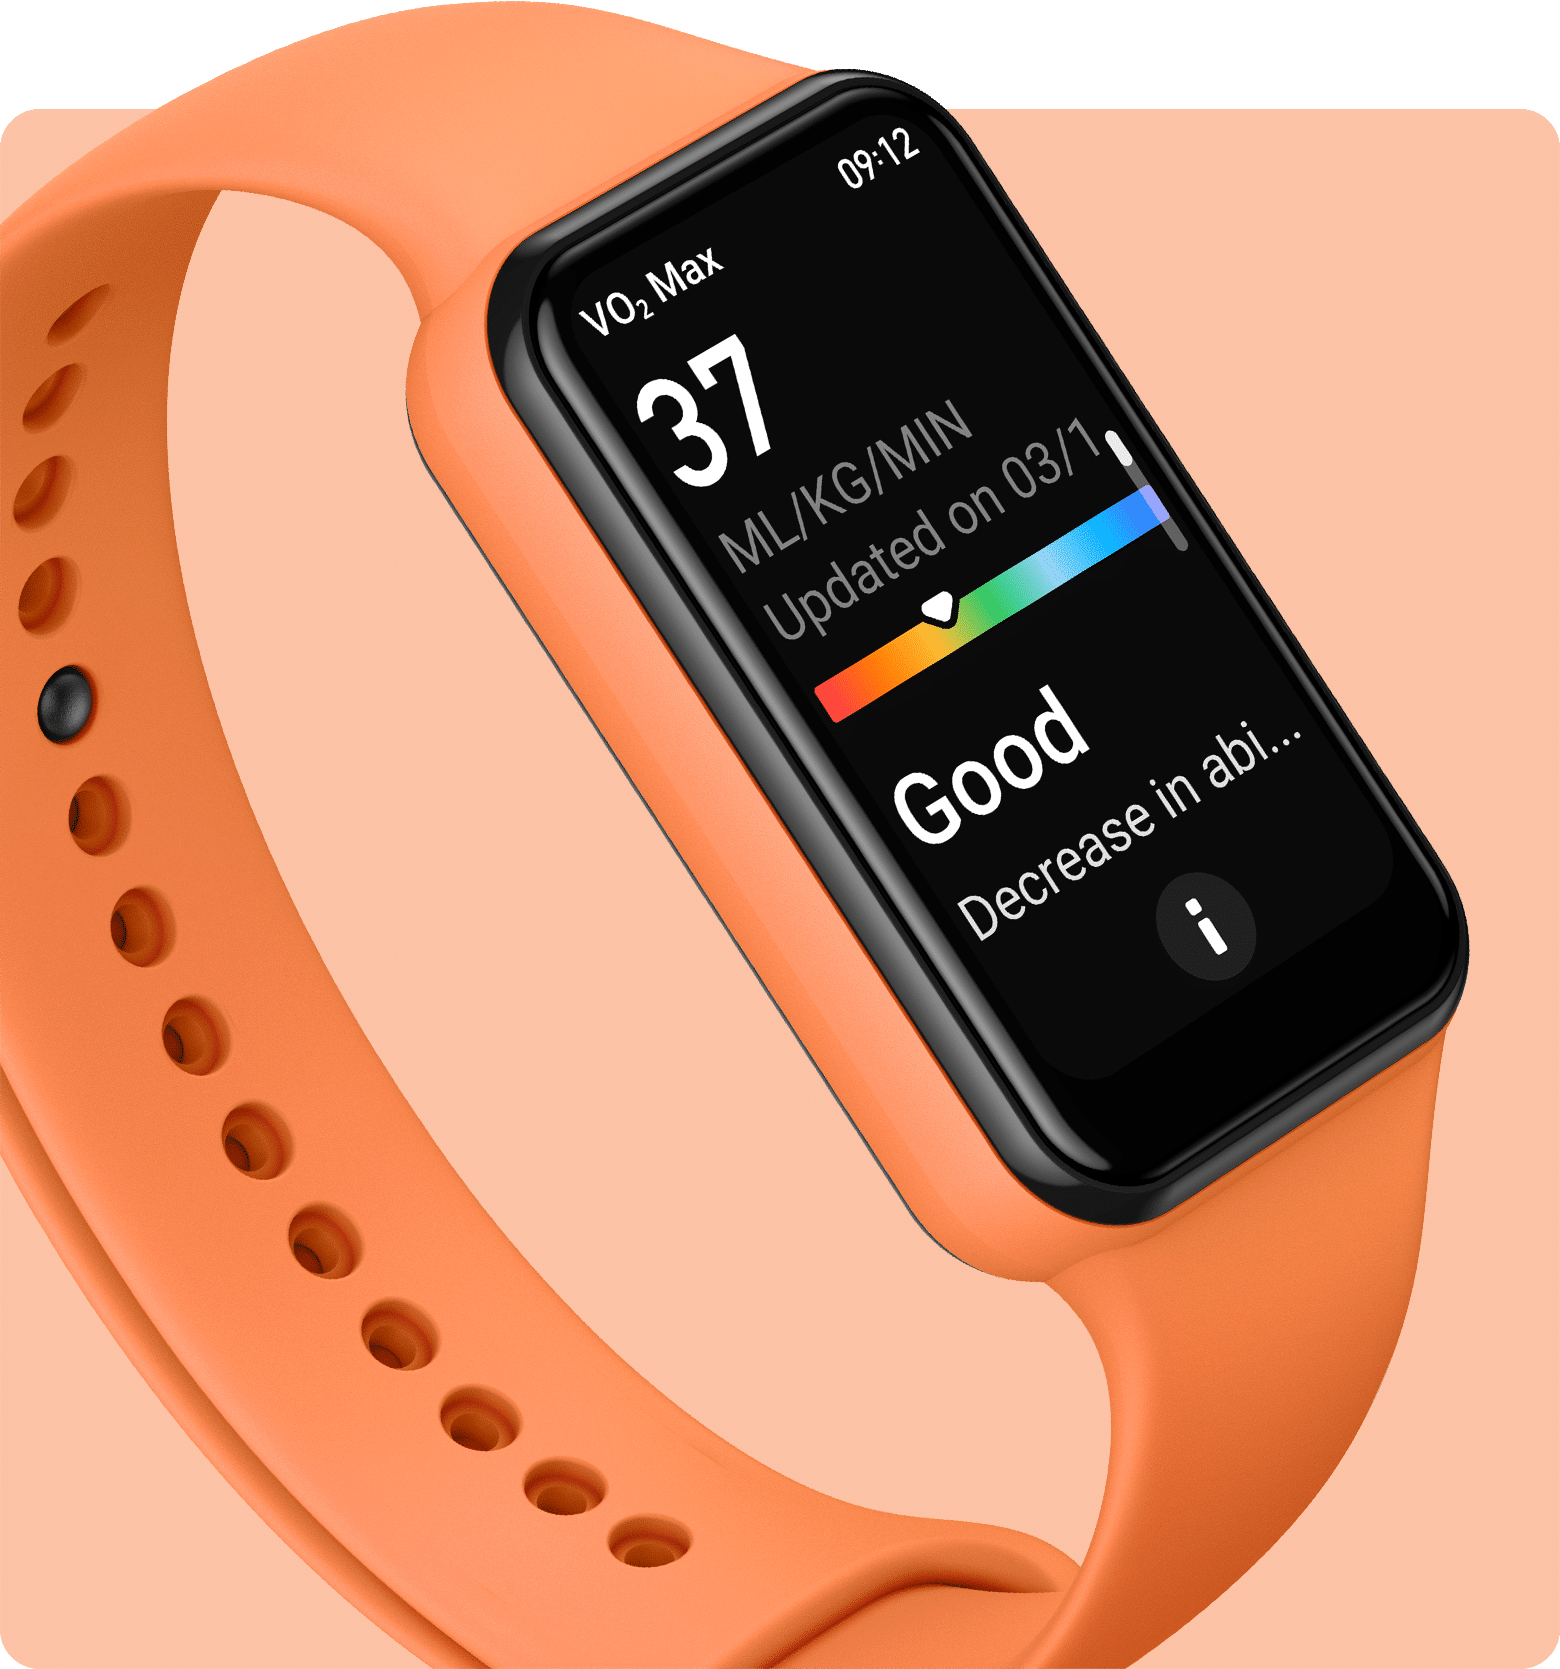 Amazfit Band 7 fitness tracker leaks online; expected to cost around $50 -  Gizmochina